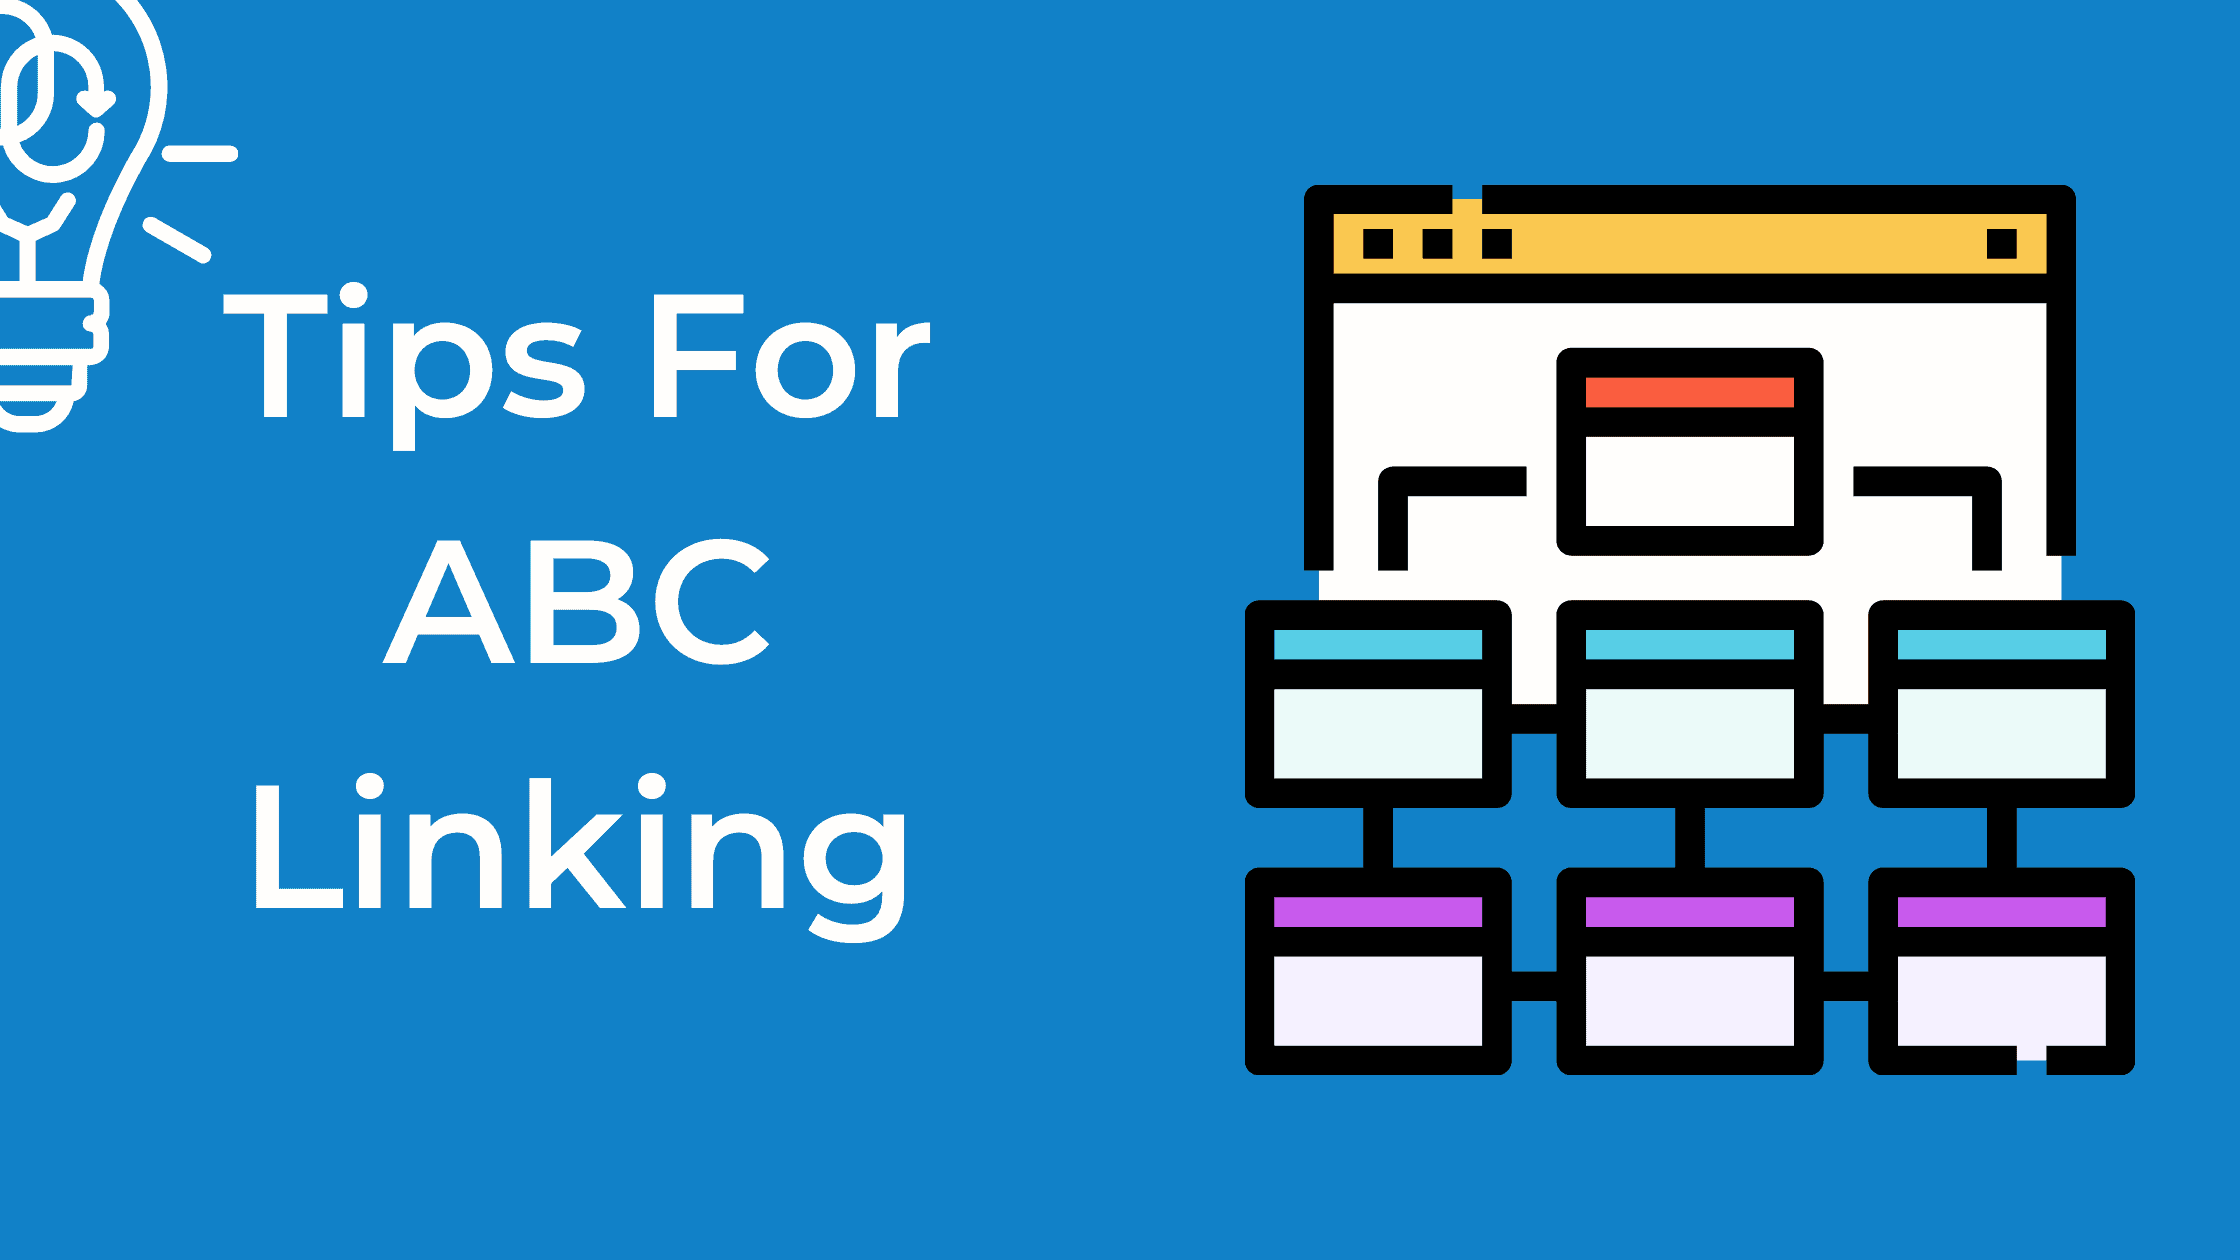 Tips For ABC Linking